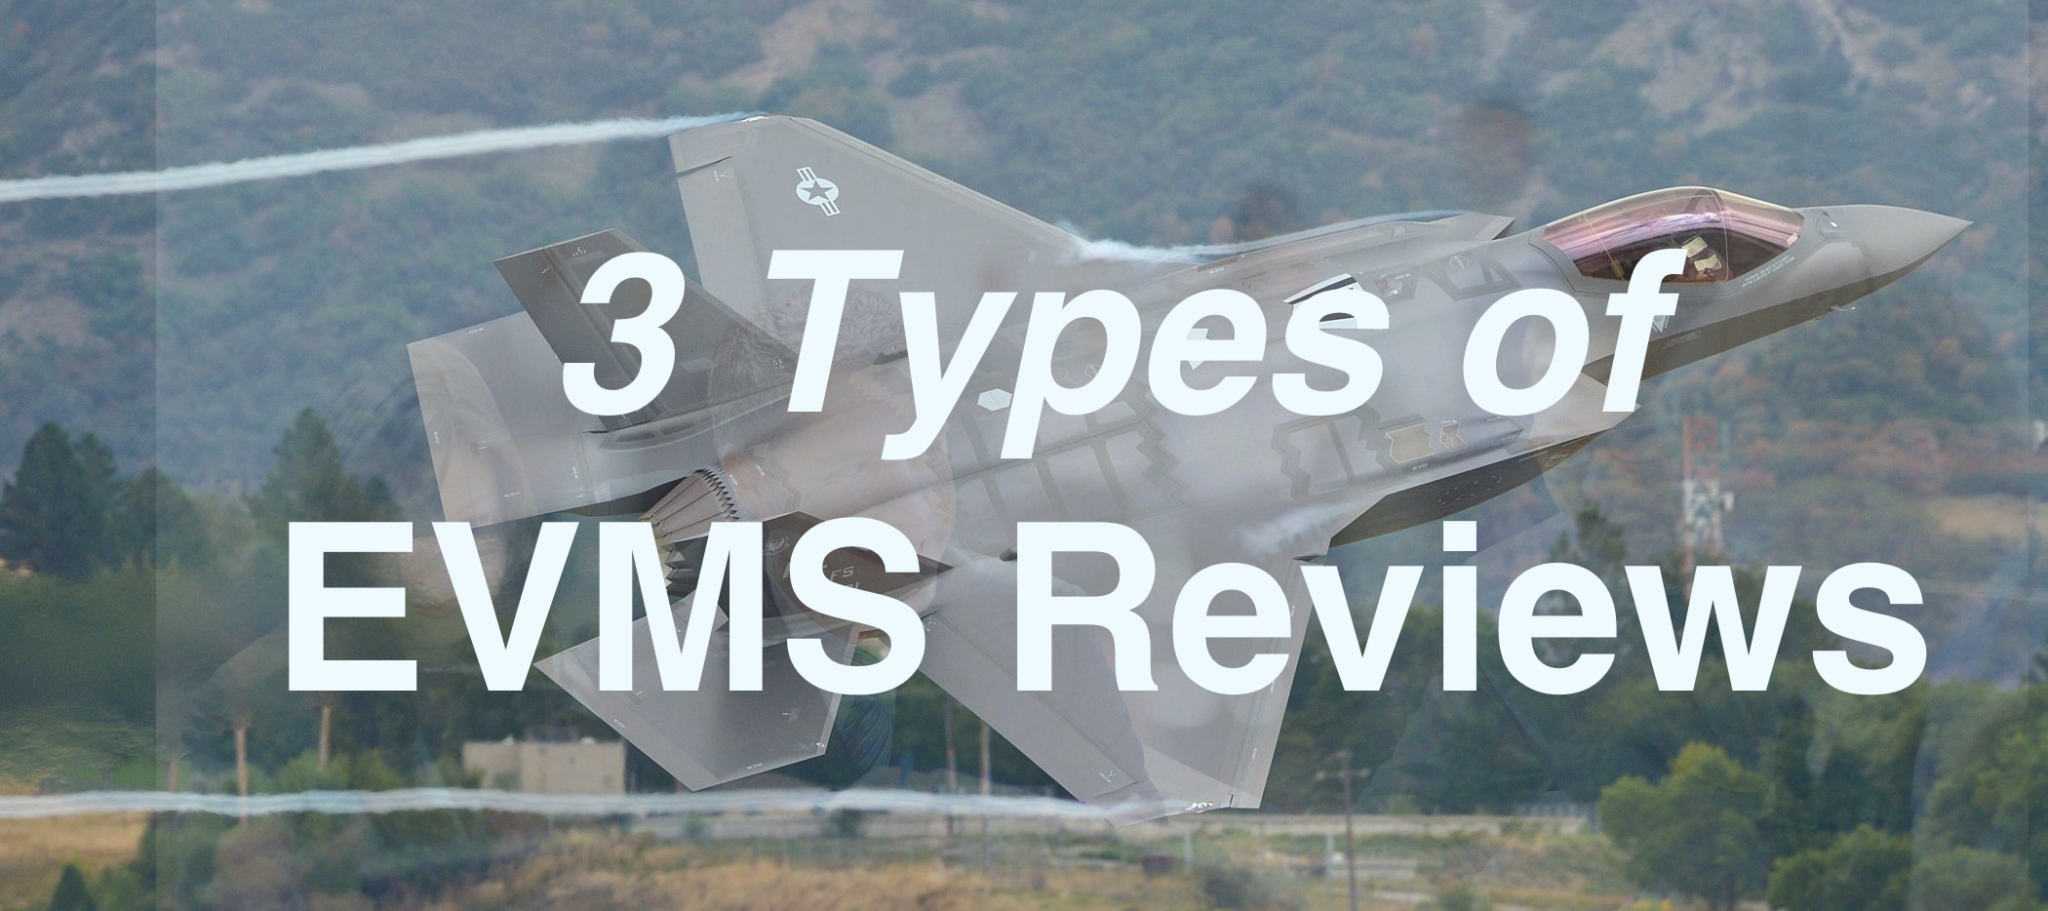 3 Types of EVMS Reviews